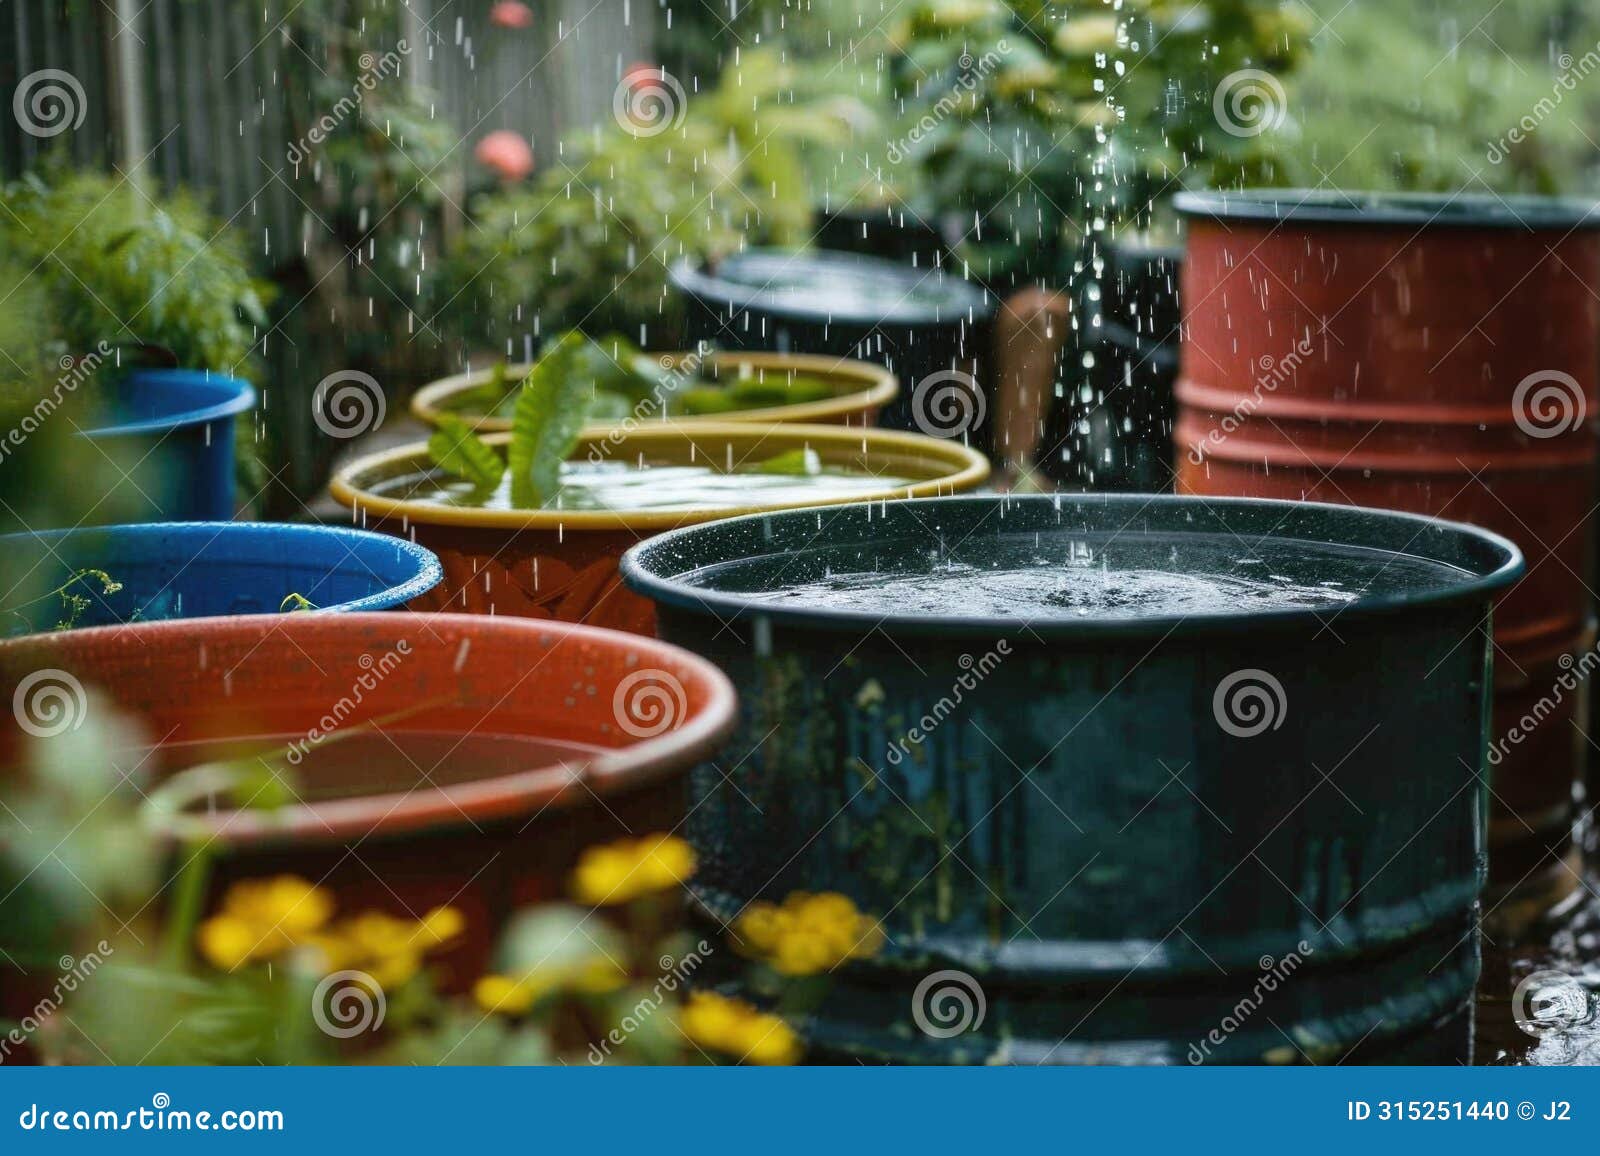 rainwater collecting in barrels during a heavy downpour in a tropical backyard setting